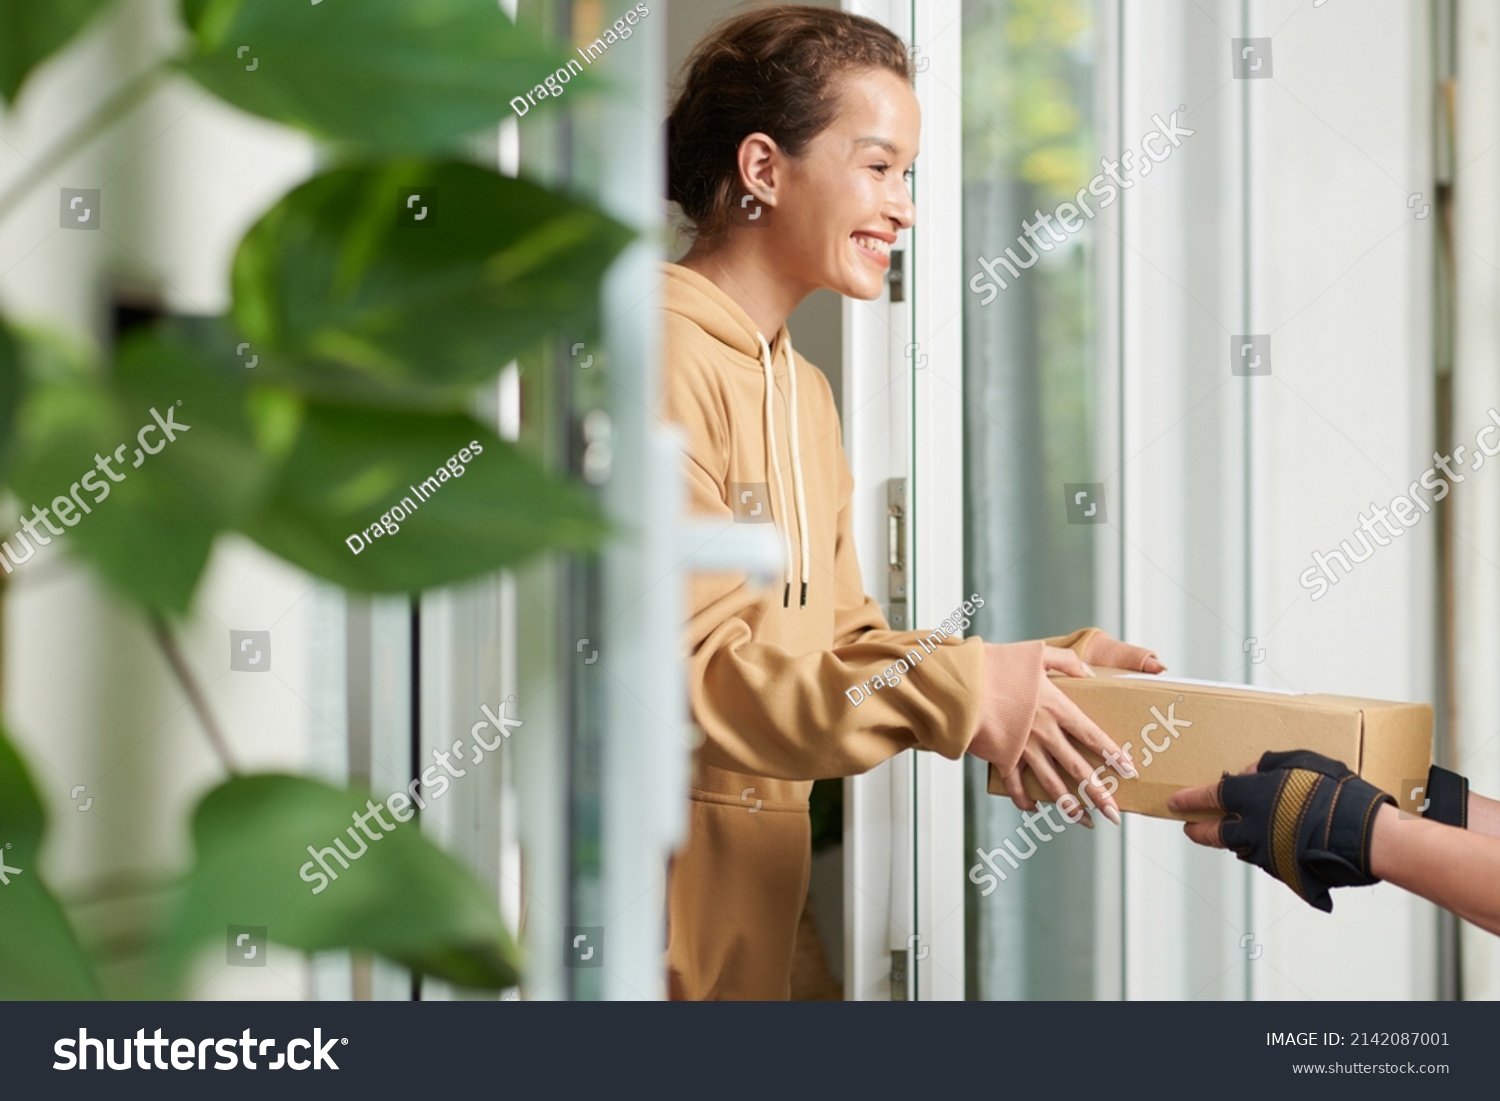 Happy excited young woman receiving package that delivery man brought to her house #2142087001